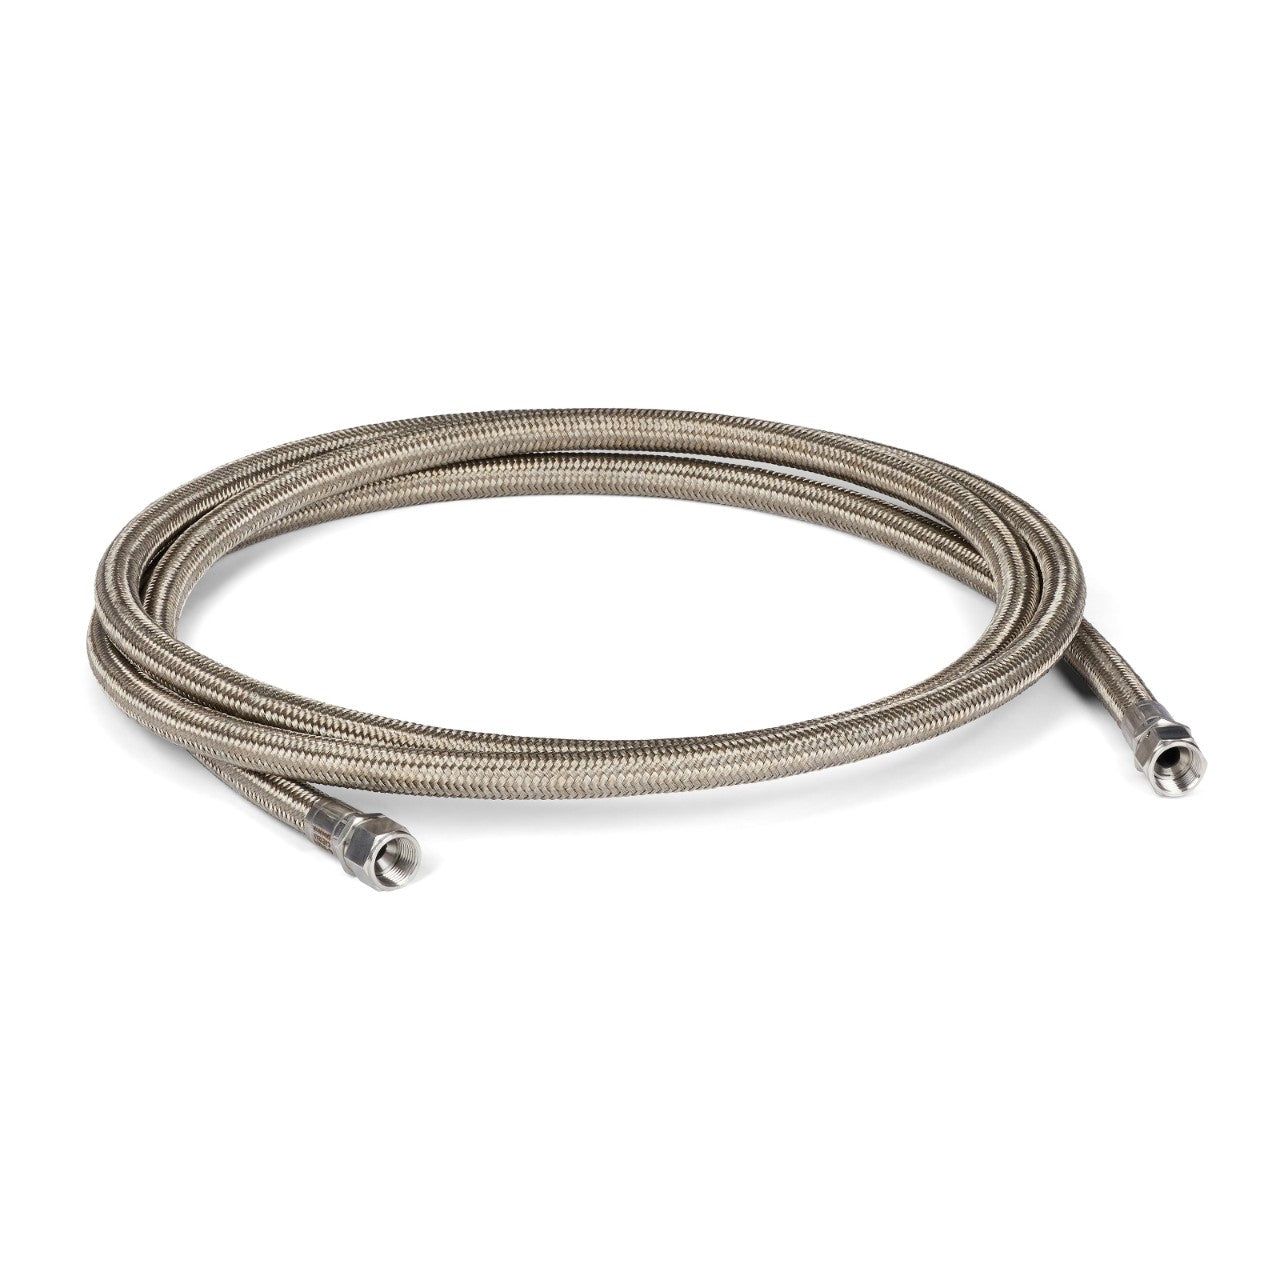 10 ft. (3.0 M) Stainless Steel Braided PTFE Ambient Hose,  No. 16 (0.867 in. / 22.0 mm ID)